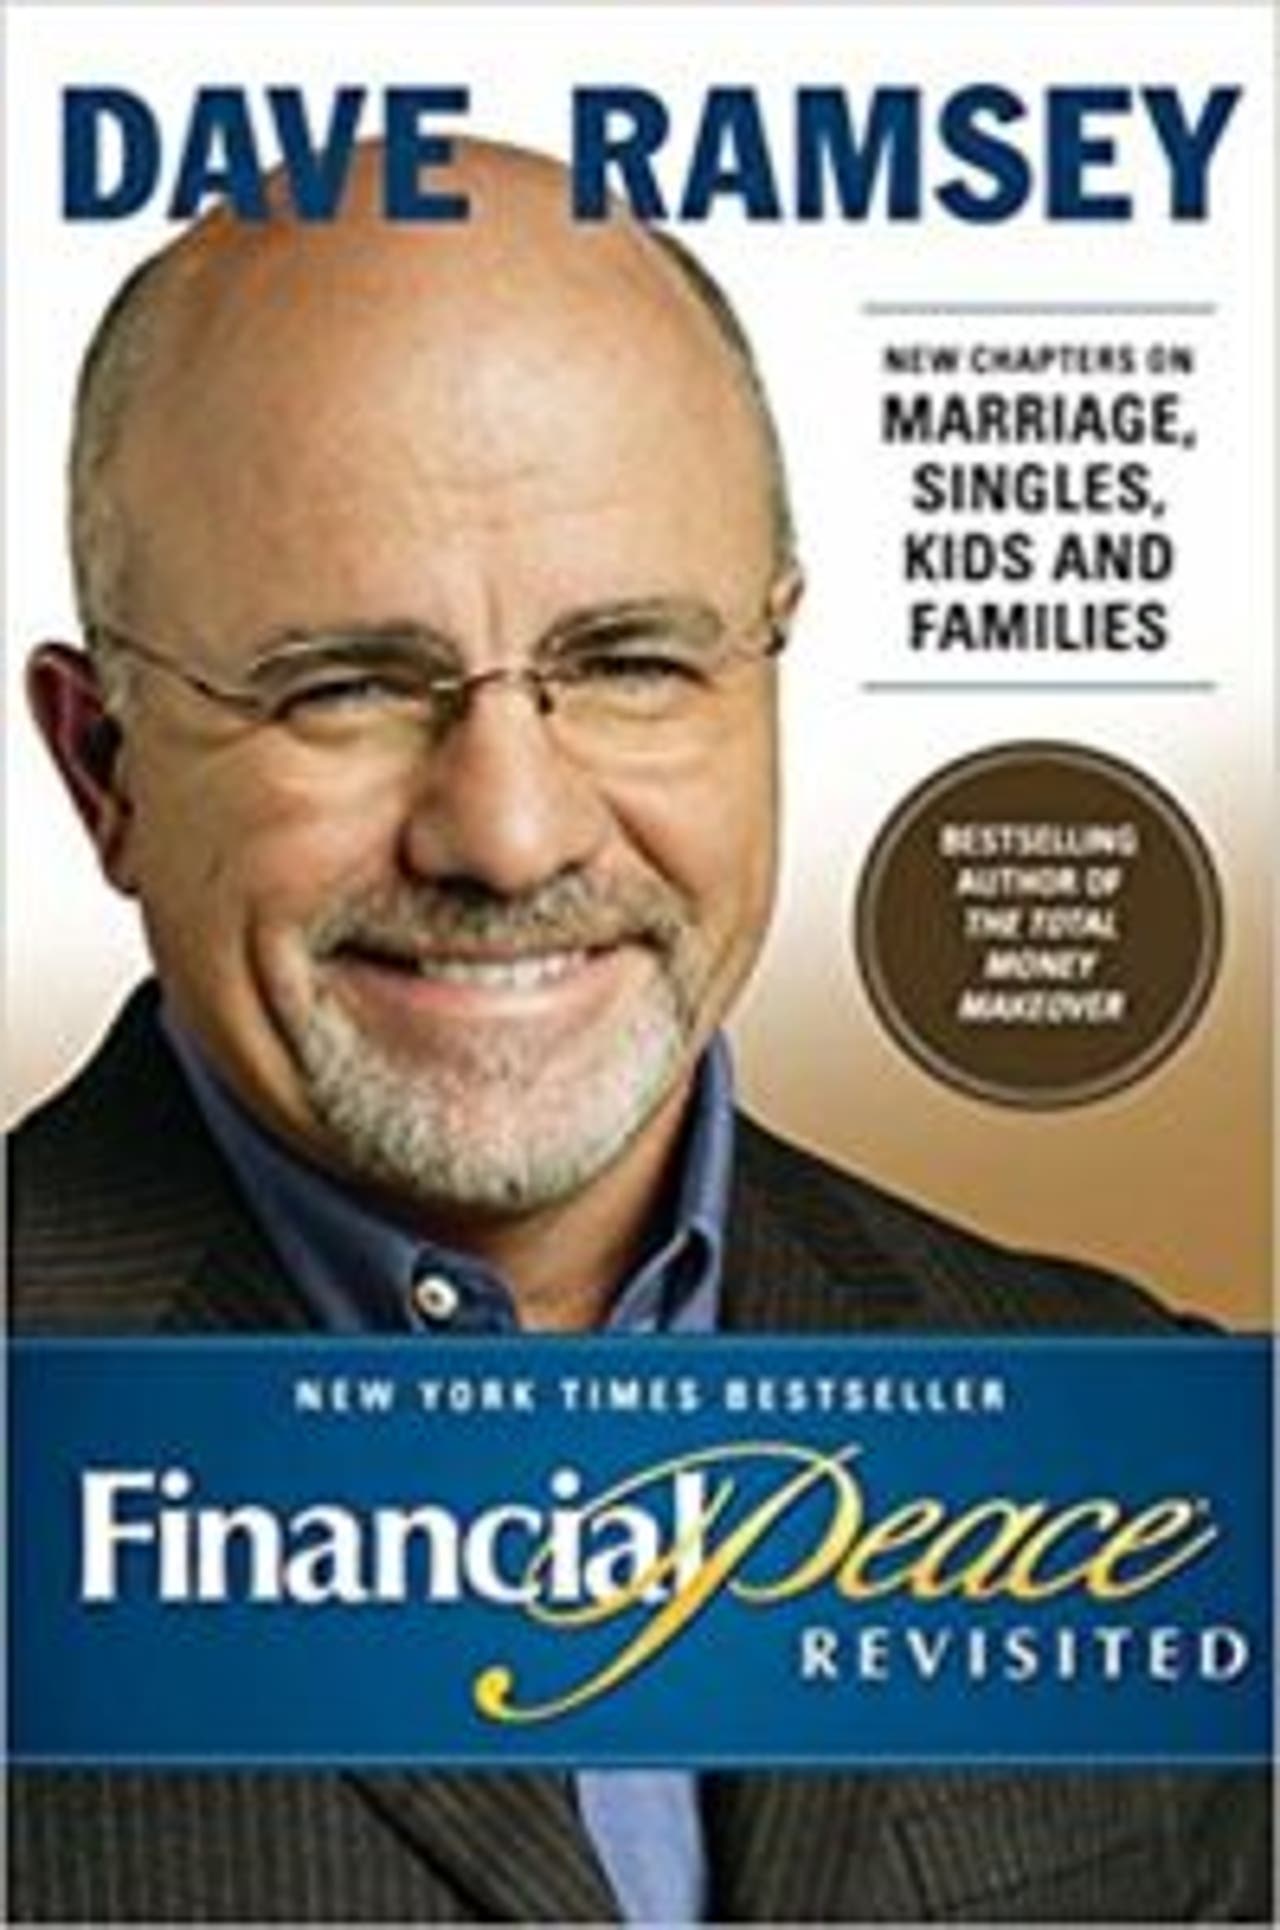 financial peace revisited